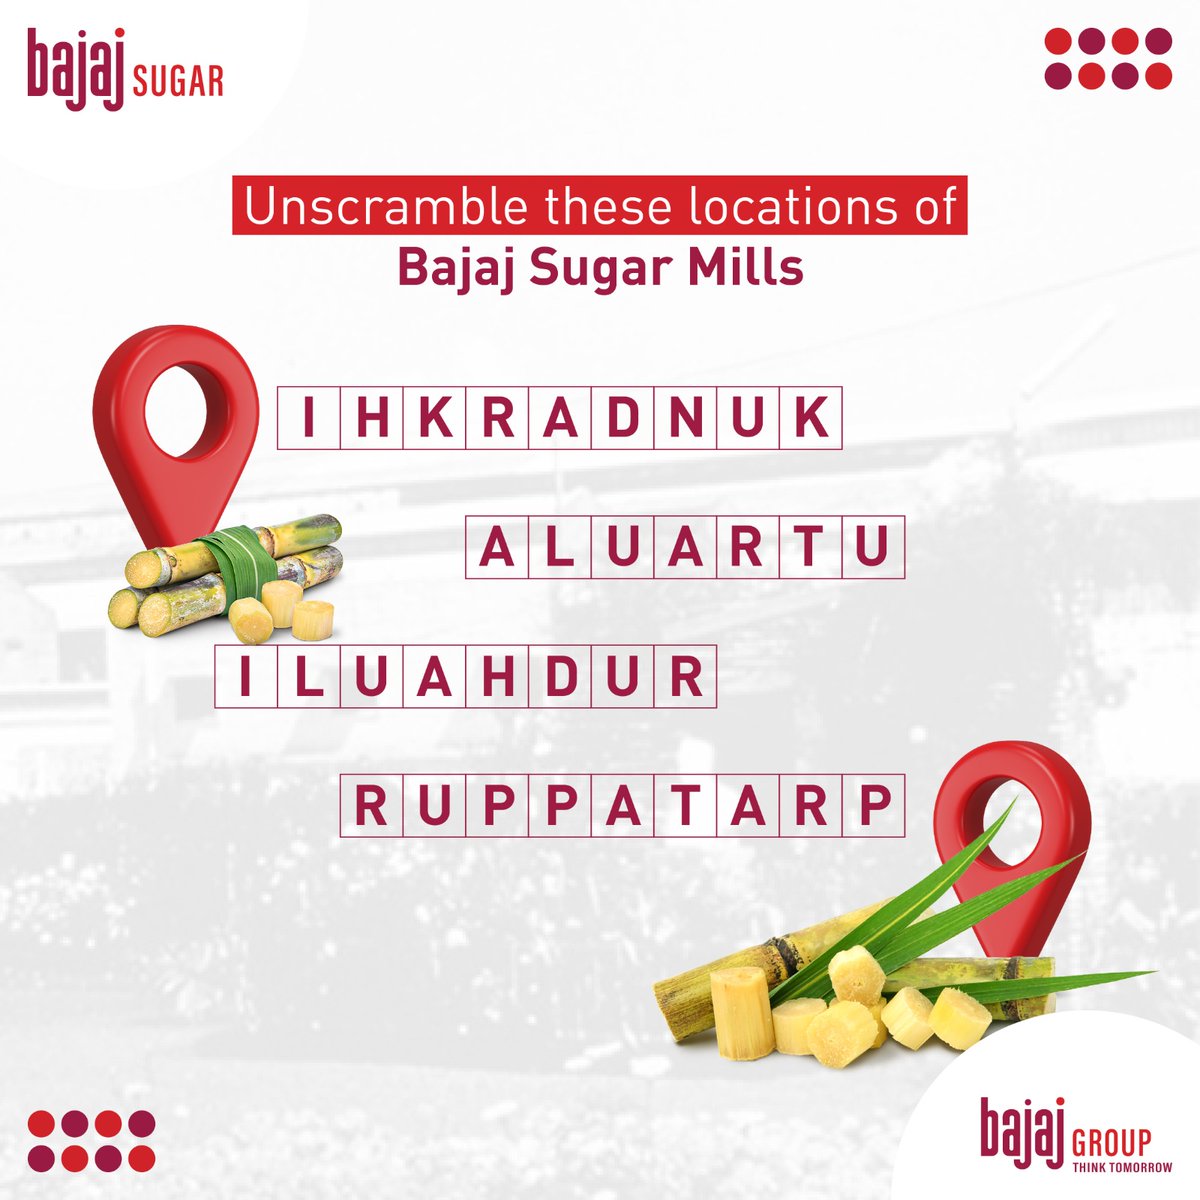 With 14 Bajaj Sugar Mills set up all over Uttar Pradesh, can you unscramble the names of these 4 above? Comment your answers and let us know.

#BajajSugar #Unscramble #GuessTheName #SugarMills #SugarProduction #92YearsOfSweetness #BajajGroup #LifeAtBajaj #LoveBajajCommunities